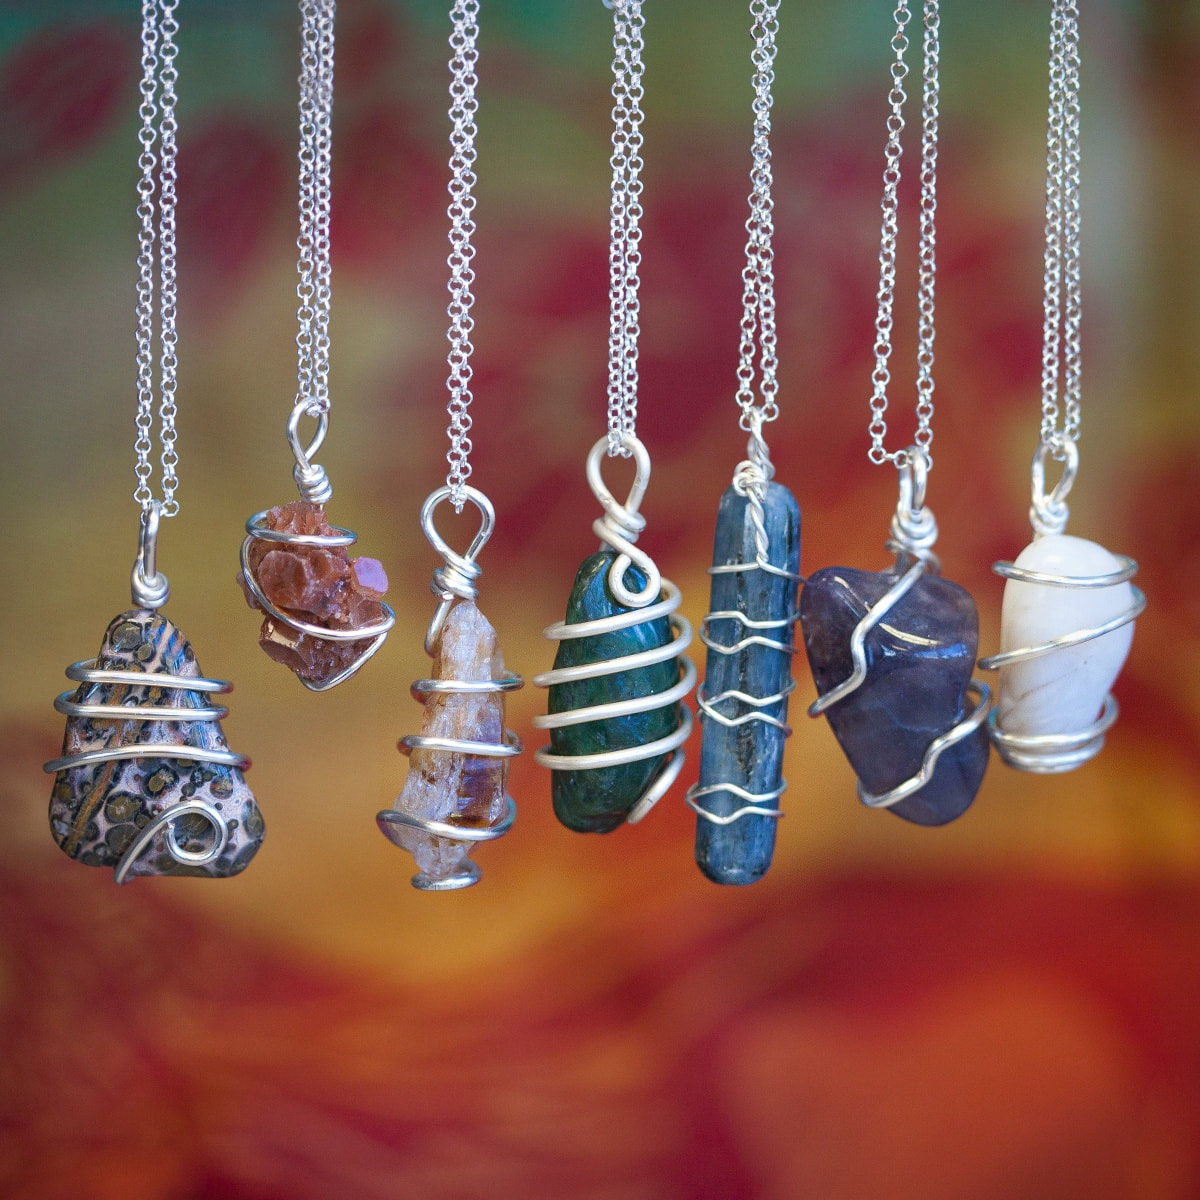 How To Make Jewelry: Find Out Wire Wrapping And Laying Stones